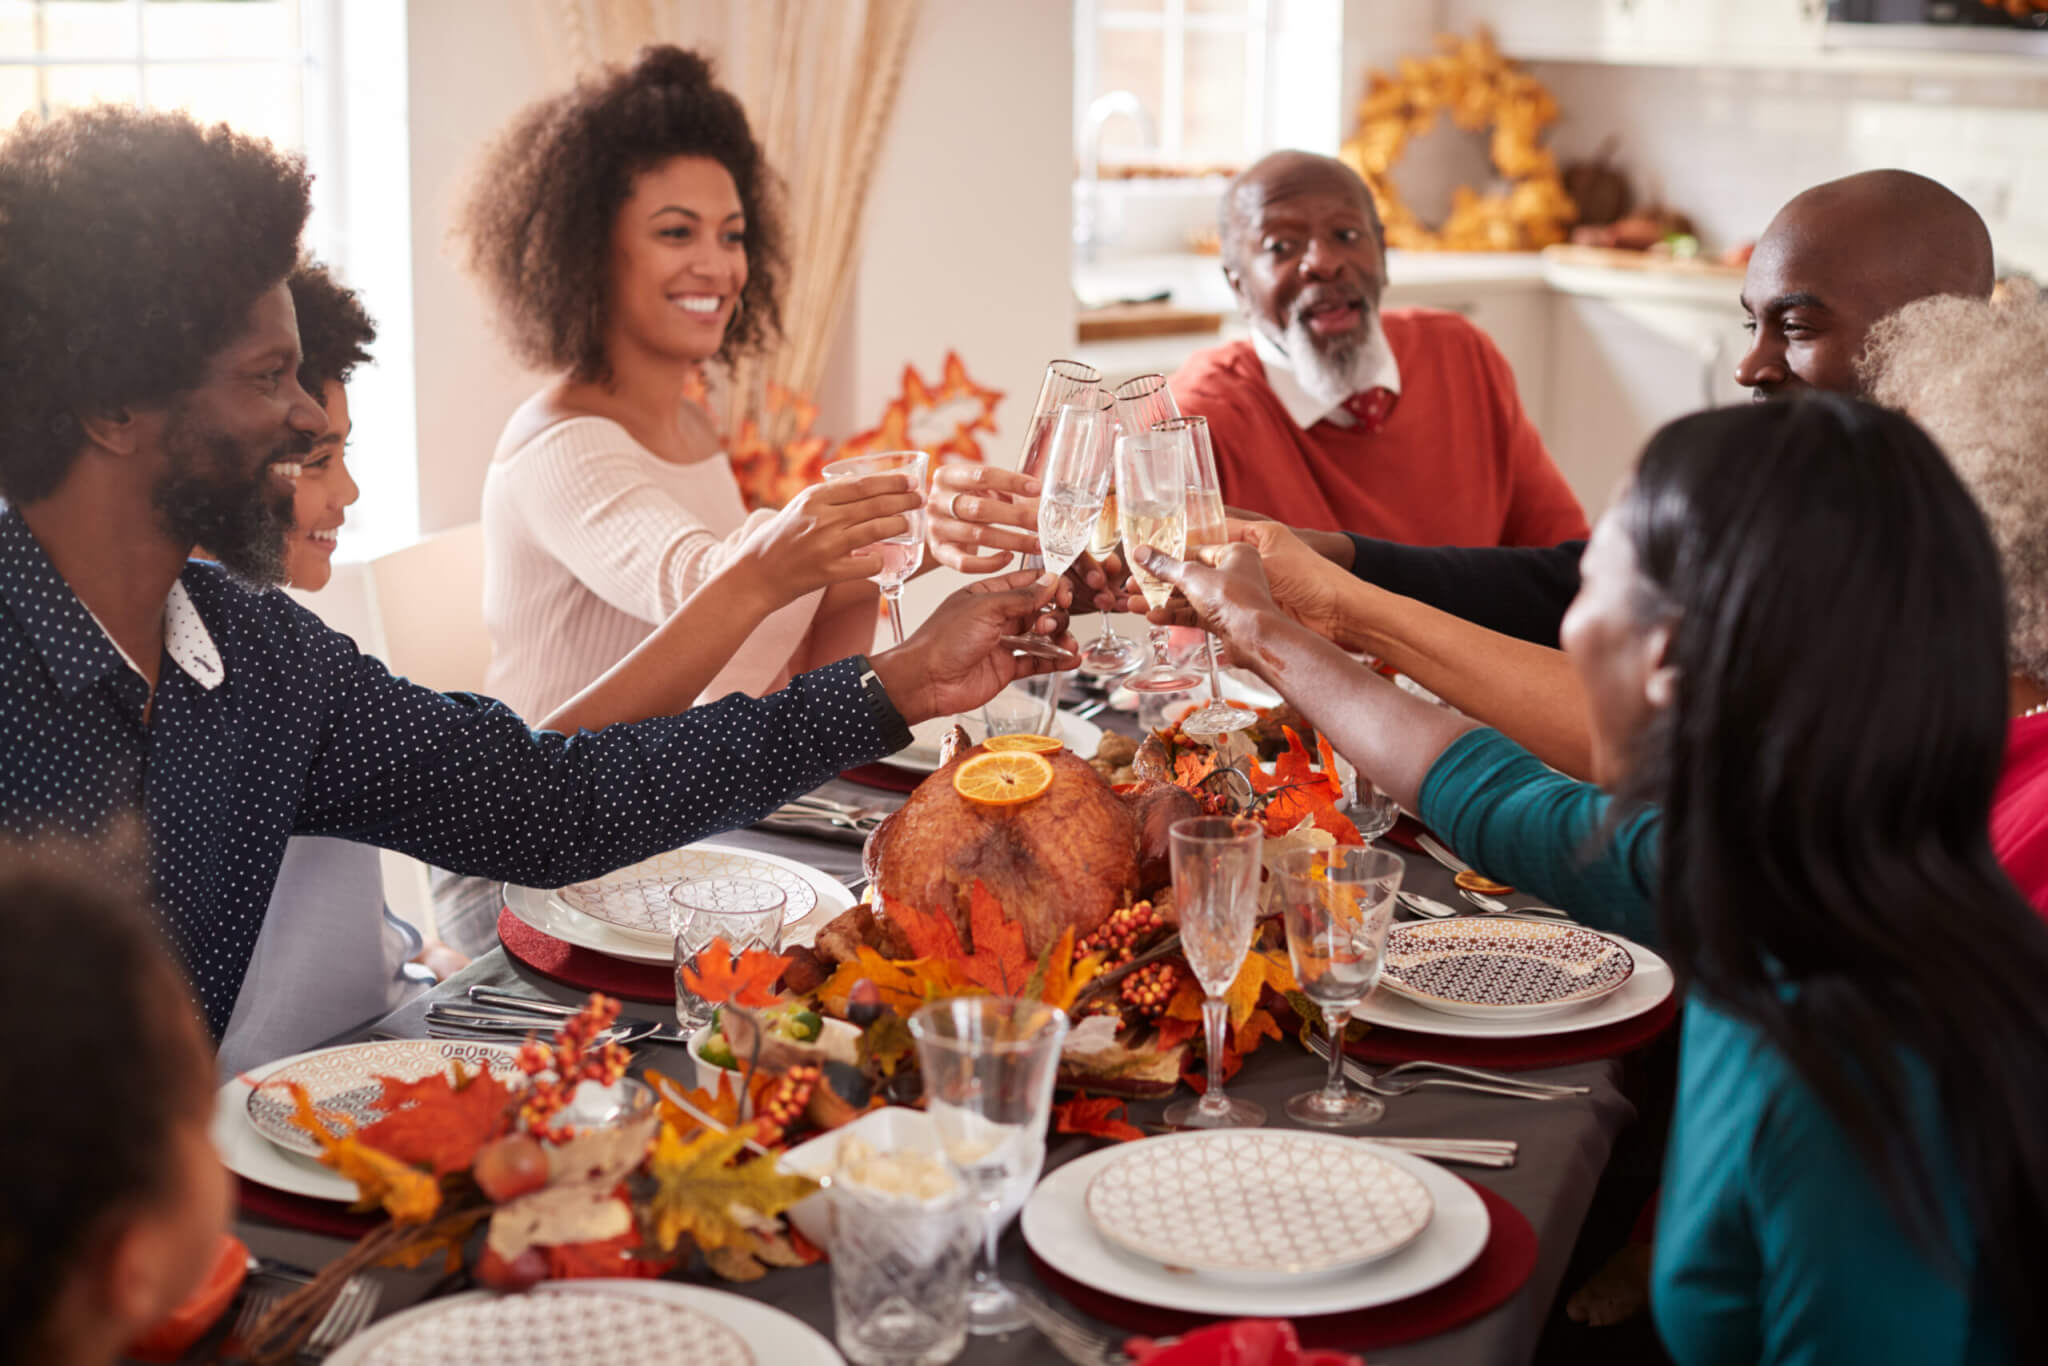 Tips For Your First Thanksgiving with the In-Laws